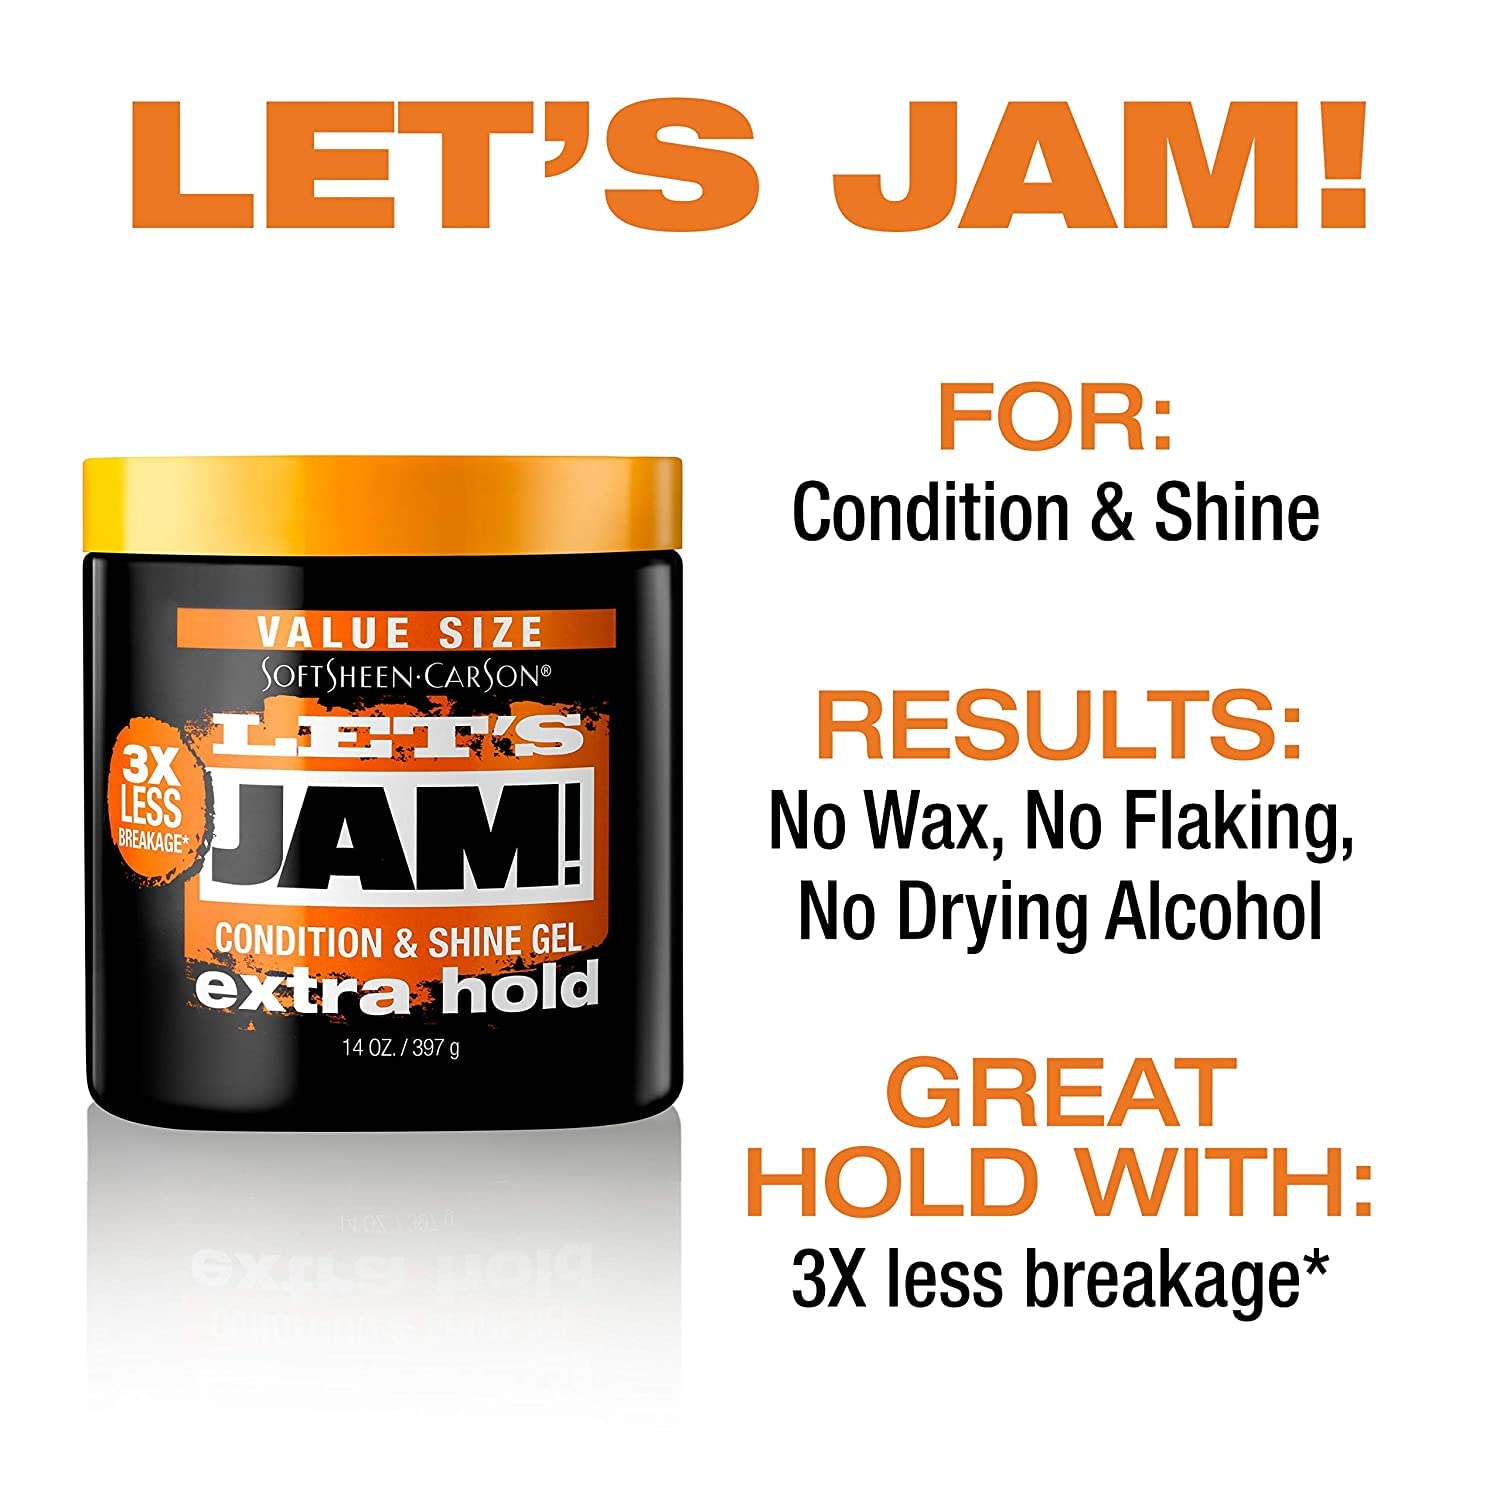 SoftSheen-Carson Let's Jam! Shining and Conditioning Hair Gel by Dark and Lovely, Extra Hold, All Hair Types, Styling Gel Great for Braiding, Twisting & Smooth Edges, Extra Hold, 14 oz : Body Scrubs : Beauty & Personal Care